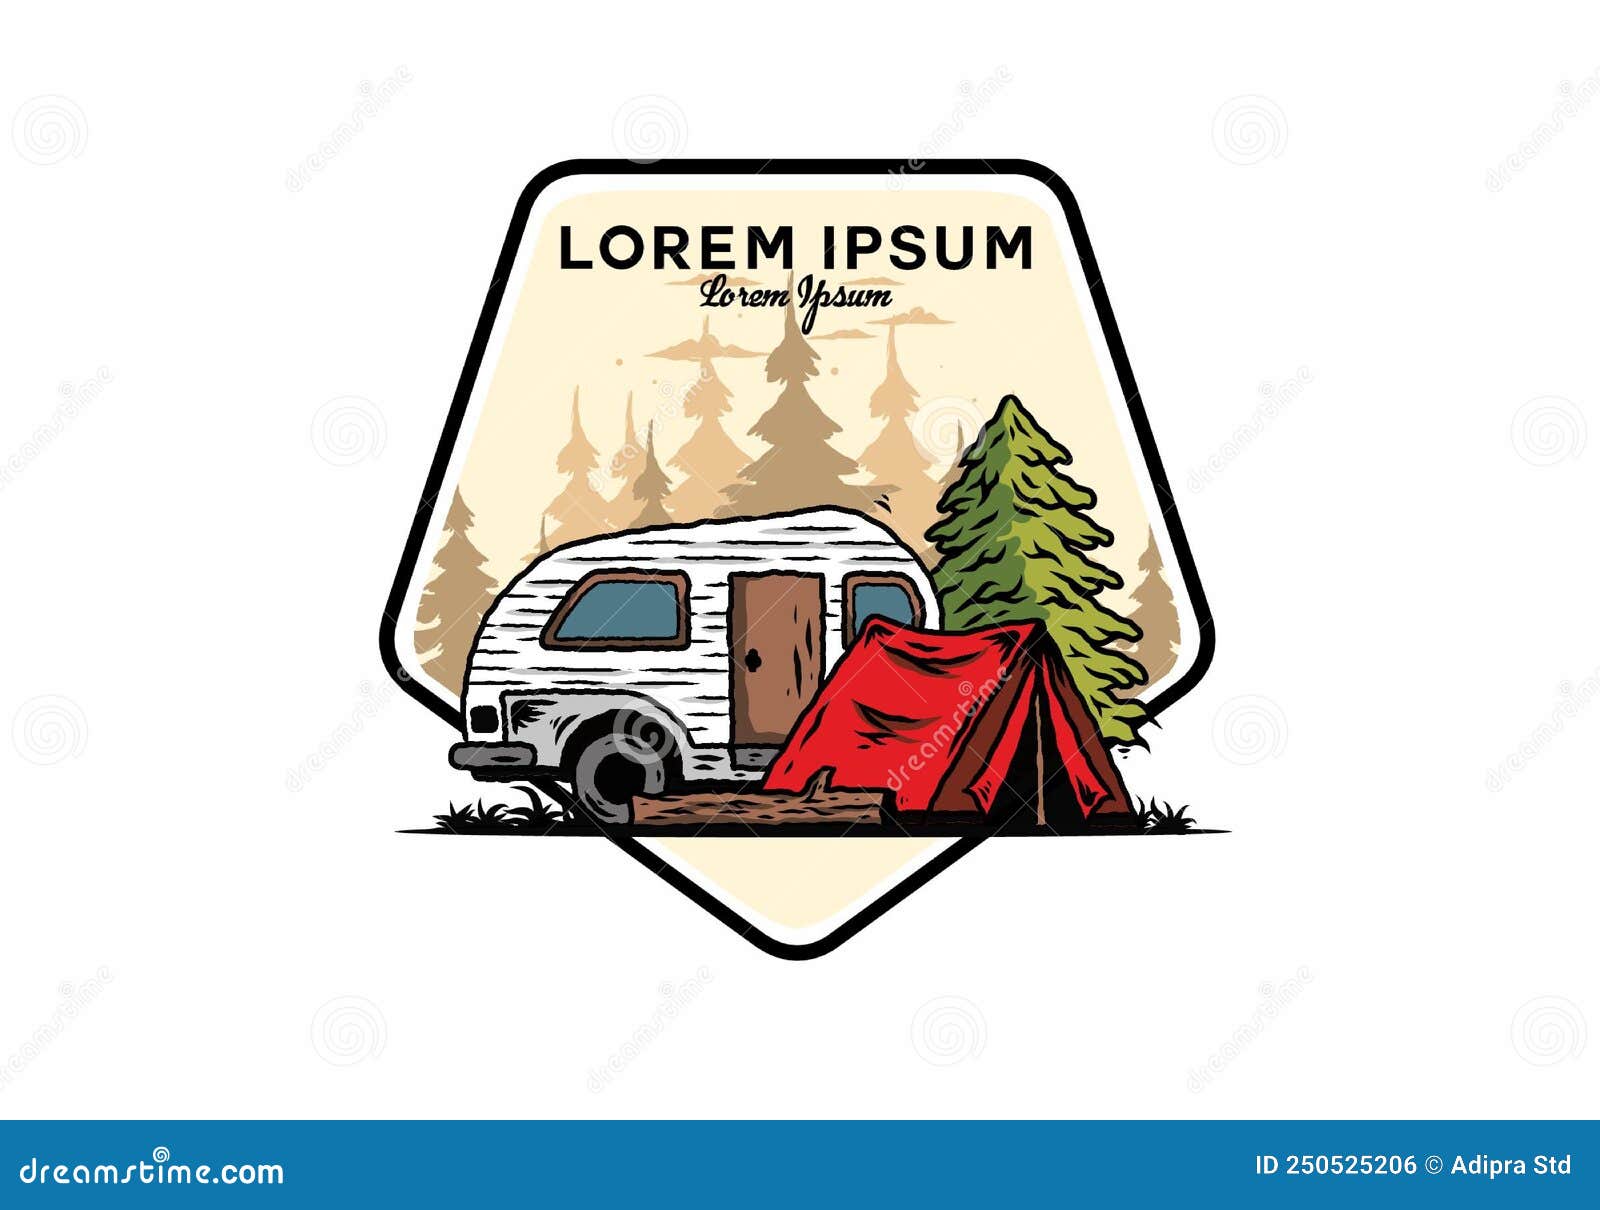 Teardrop Camper and Tent in Front of Pine Tree Illustration Stock ...